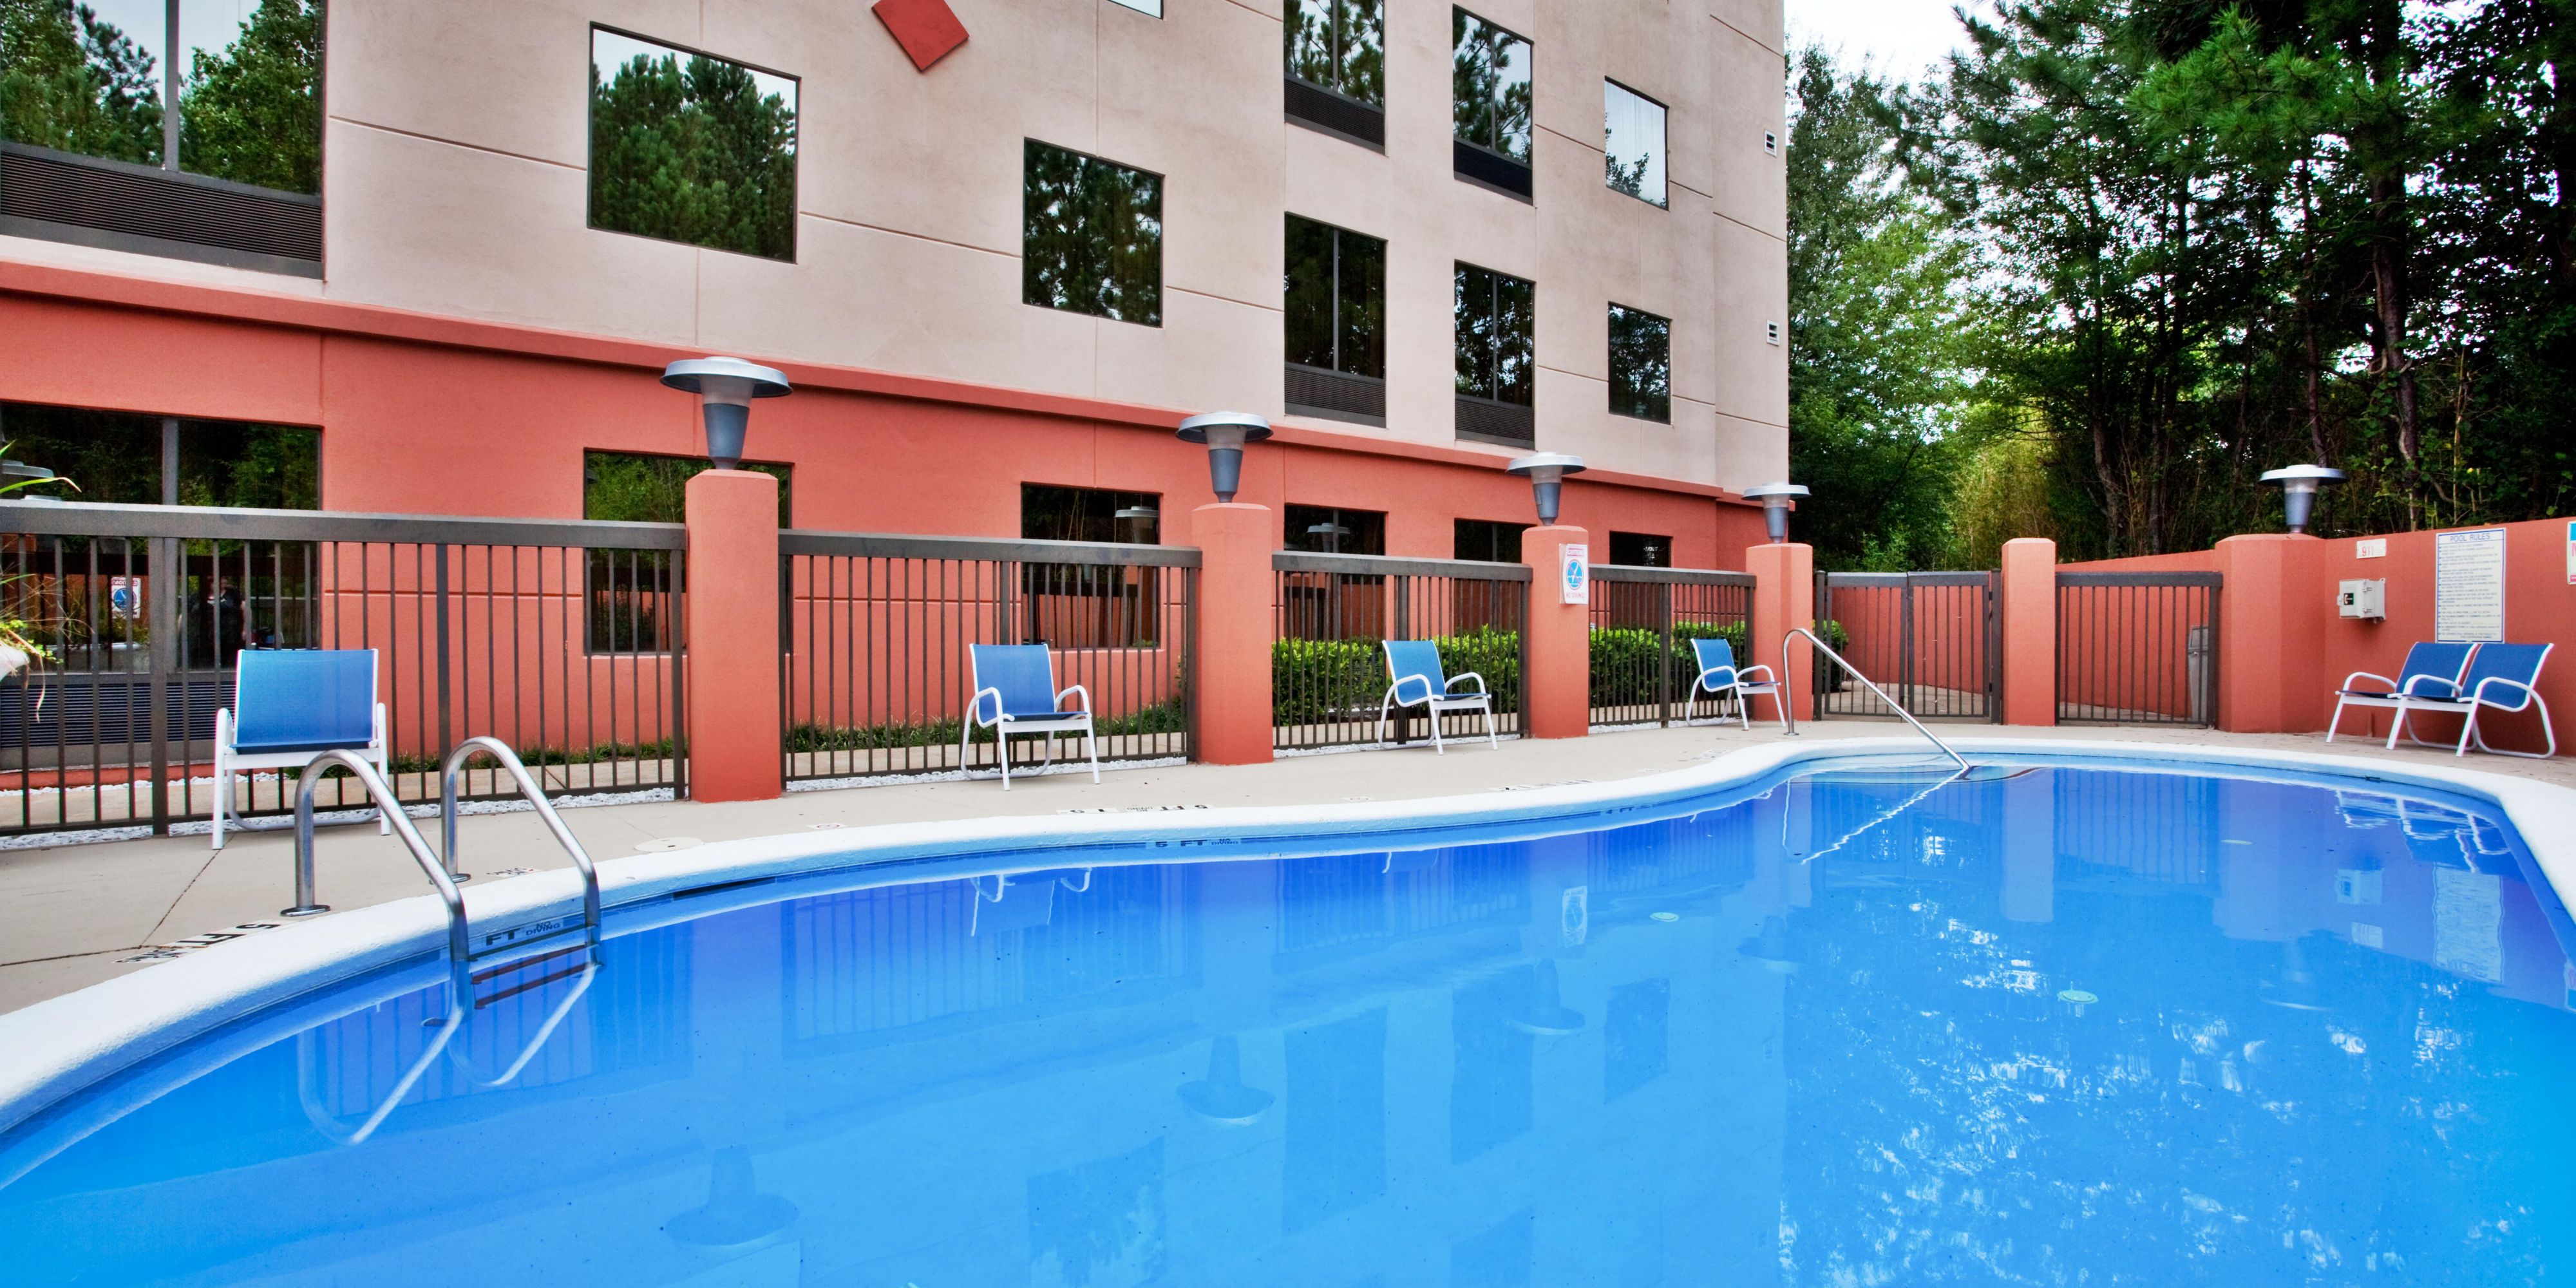 Enjoy the warm weather by sitting out at our wonderful outdoor pool. Open 10 AM to 10 PM.